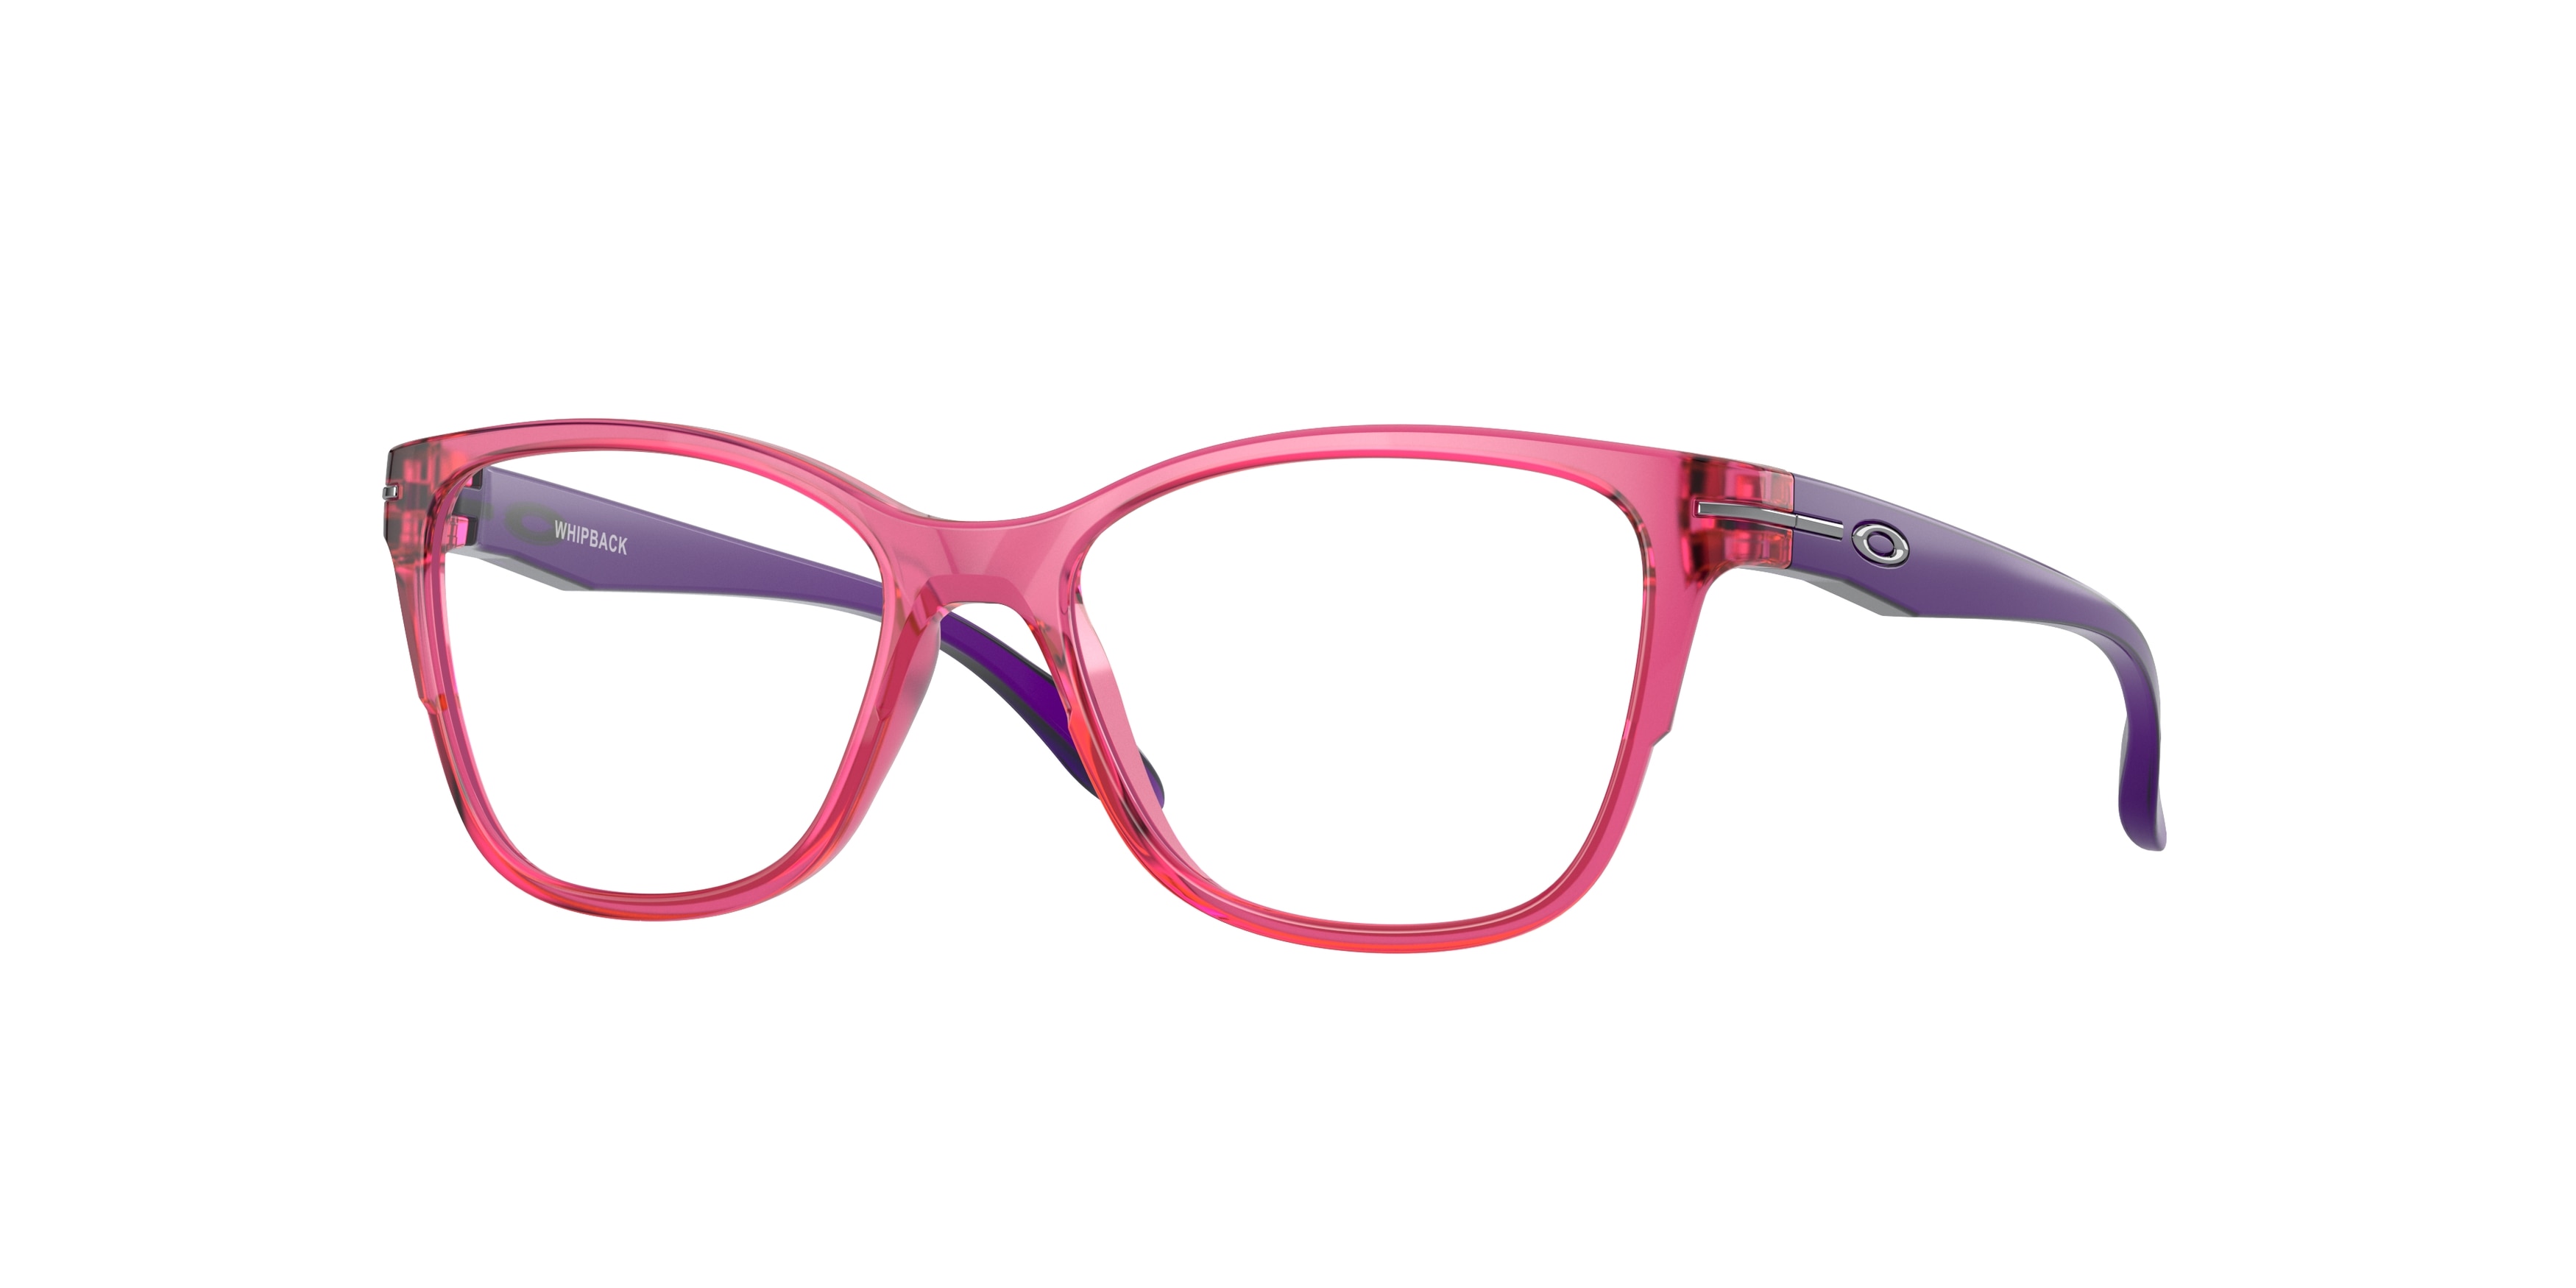 oakley_youth_0oy8016_801603_polished_pink_ref